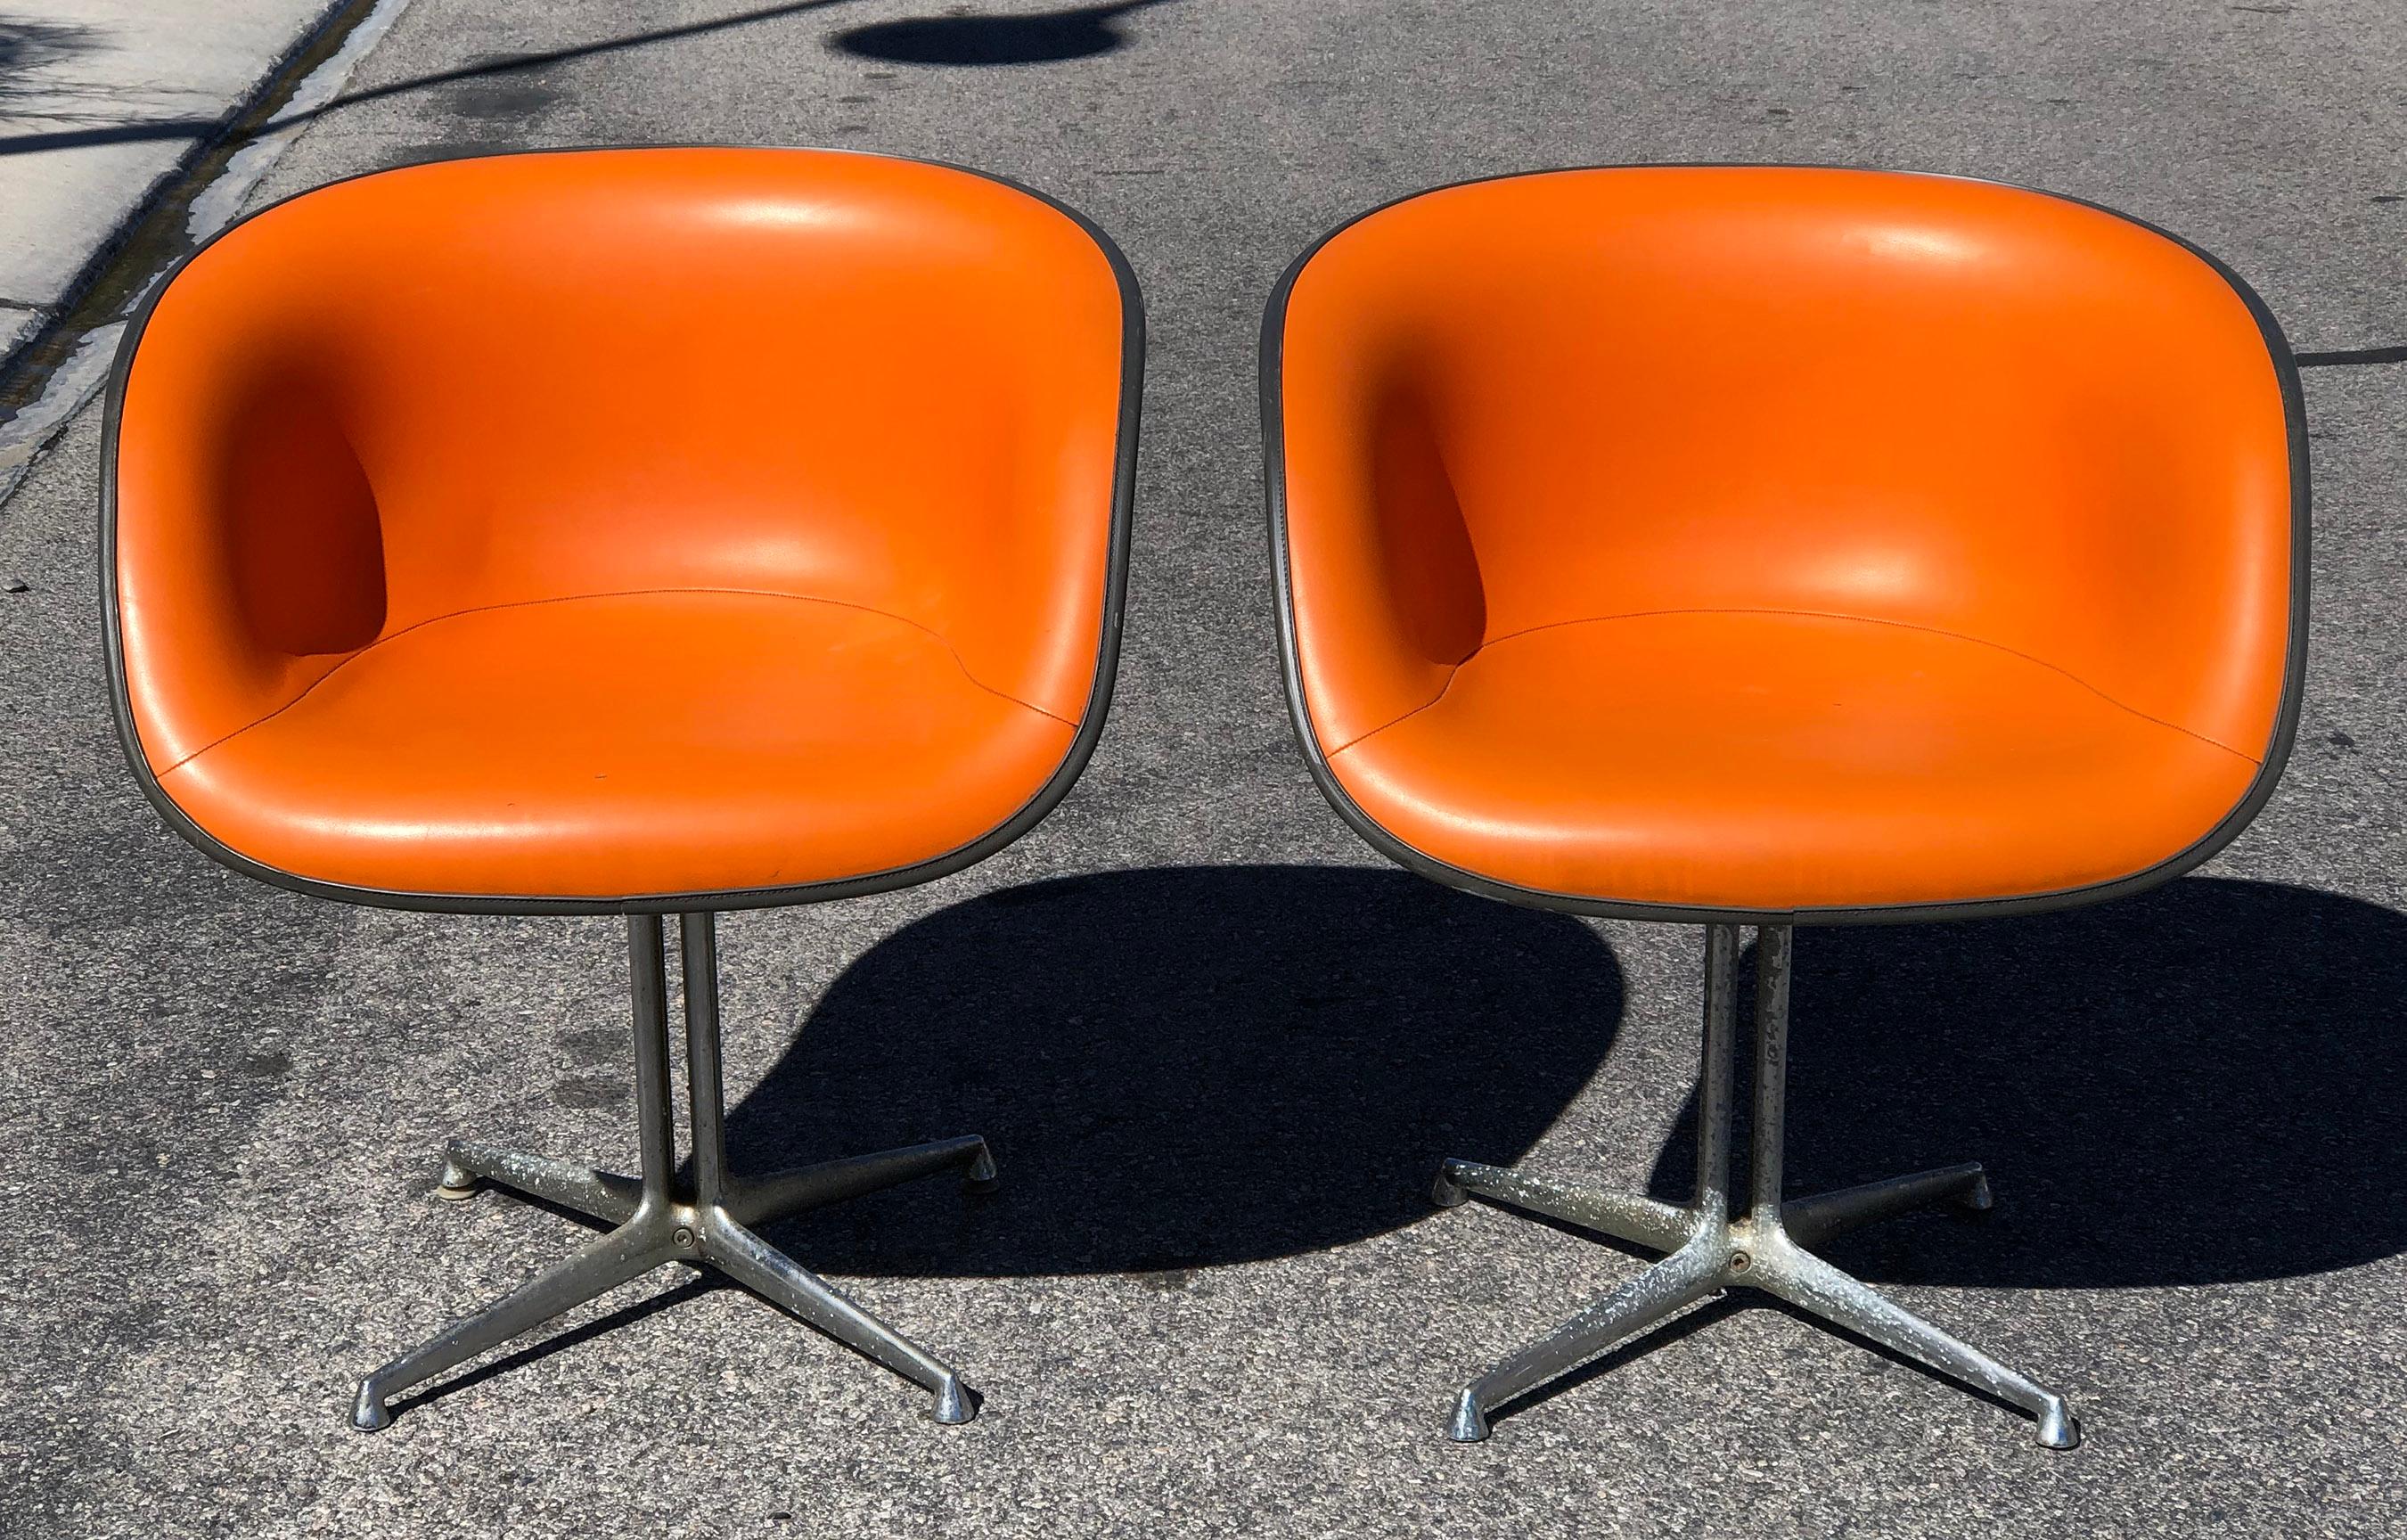 An absolutely gorgeous pair of Eames La Fonda chairs, circa 1960. These bright tangerine colored chairs both still retain their original tags, however the dates have faded off. A great pair of iconic chairs! 

Condition notes: The chairs are in